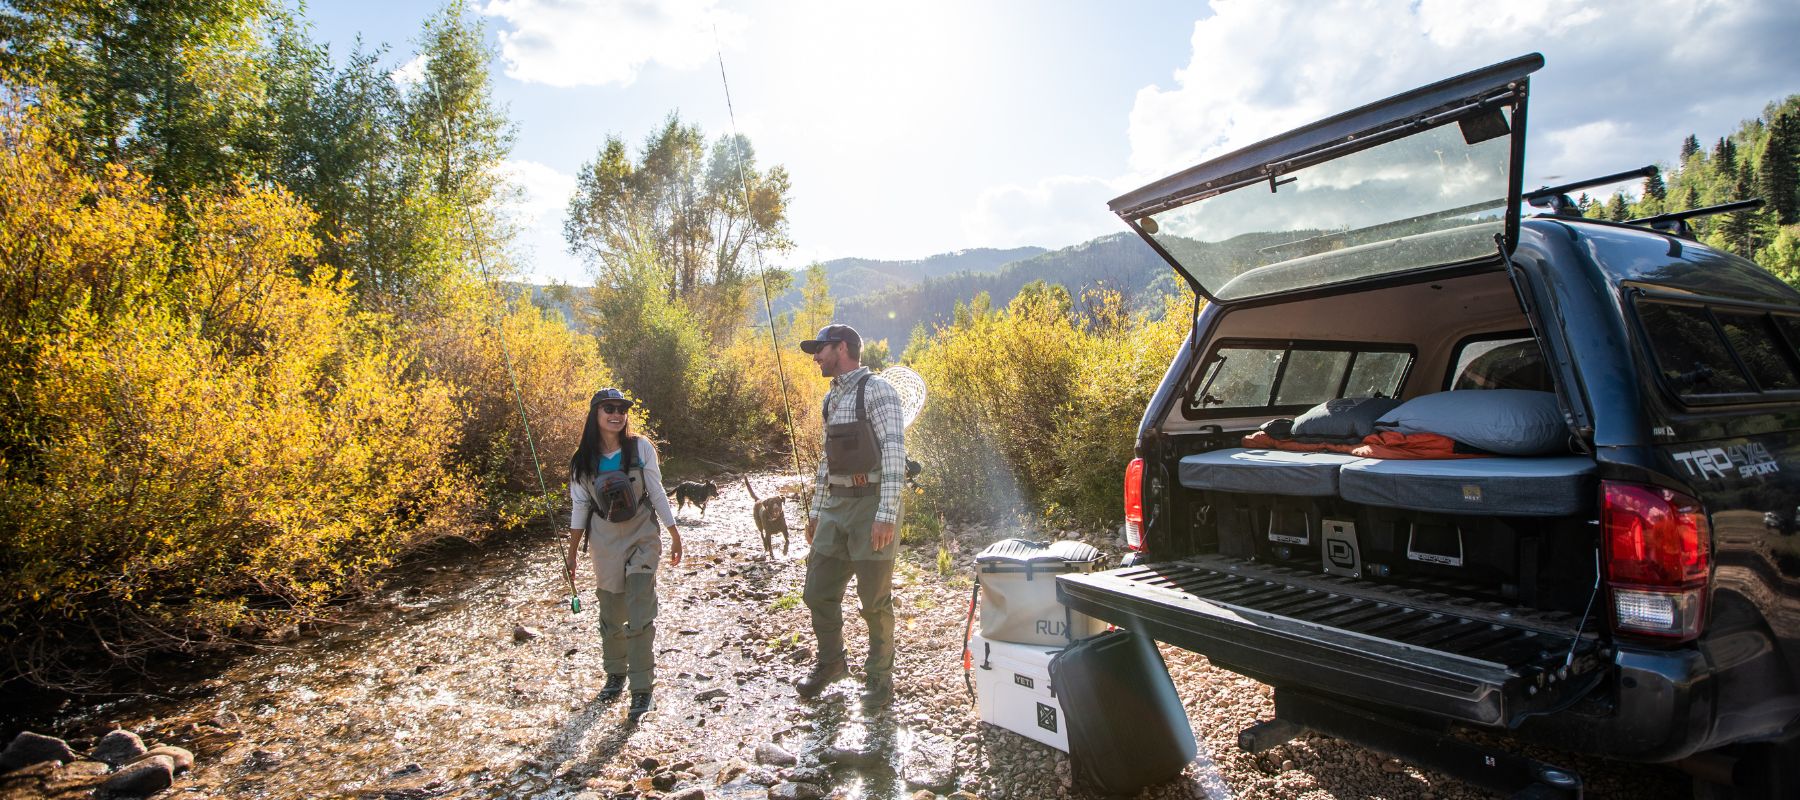 5 Tips To Make the Most out of your Camping and Fishing Trip